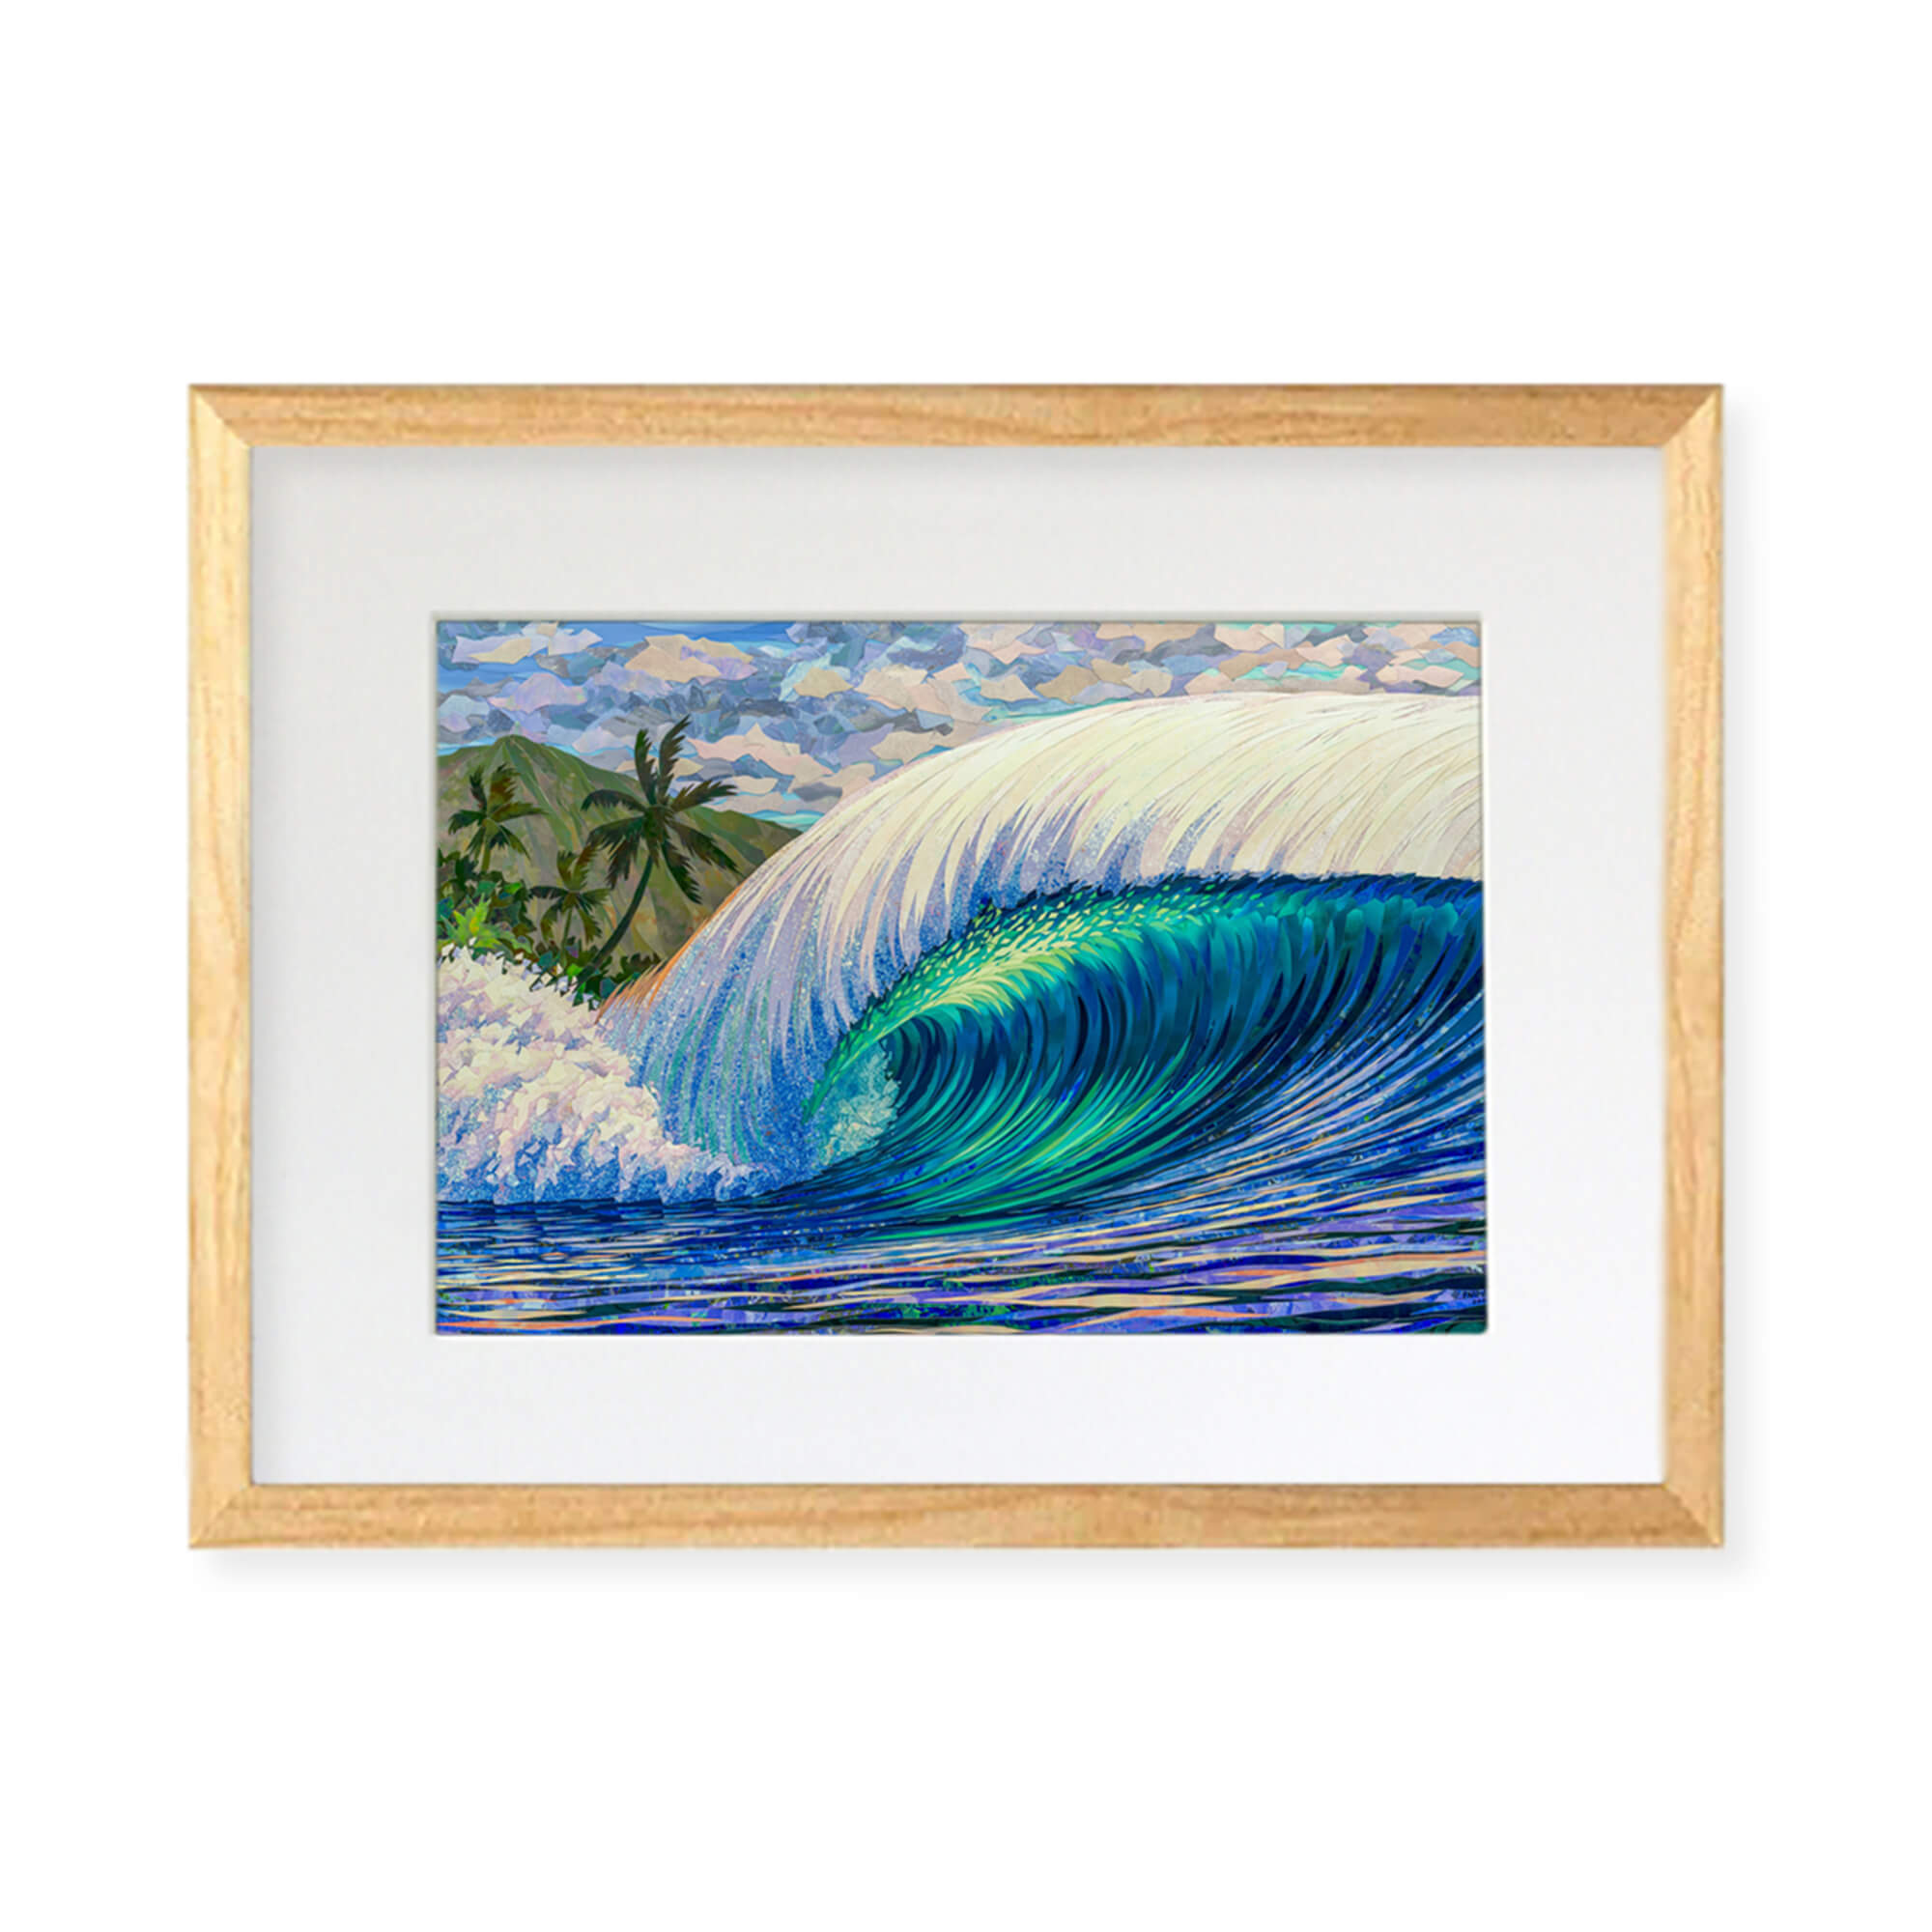 A framed matted art print featuring a collage of a large colorful rolling wave and a beautiful mountain background by Hawaii artist Patrick Parker